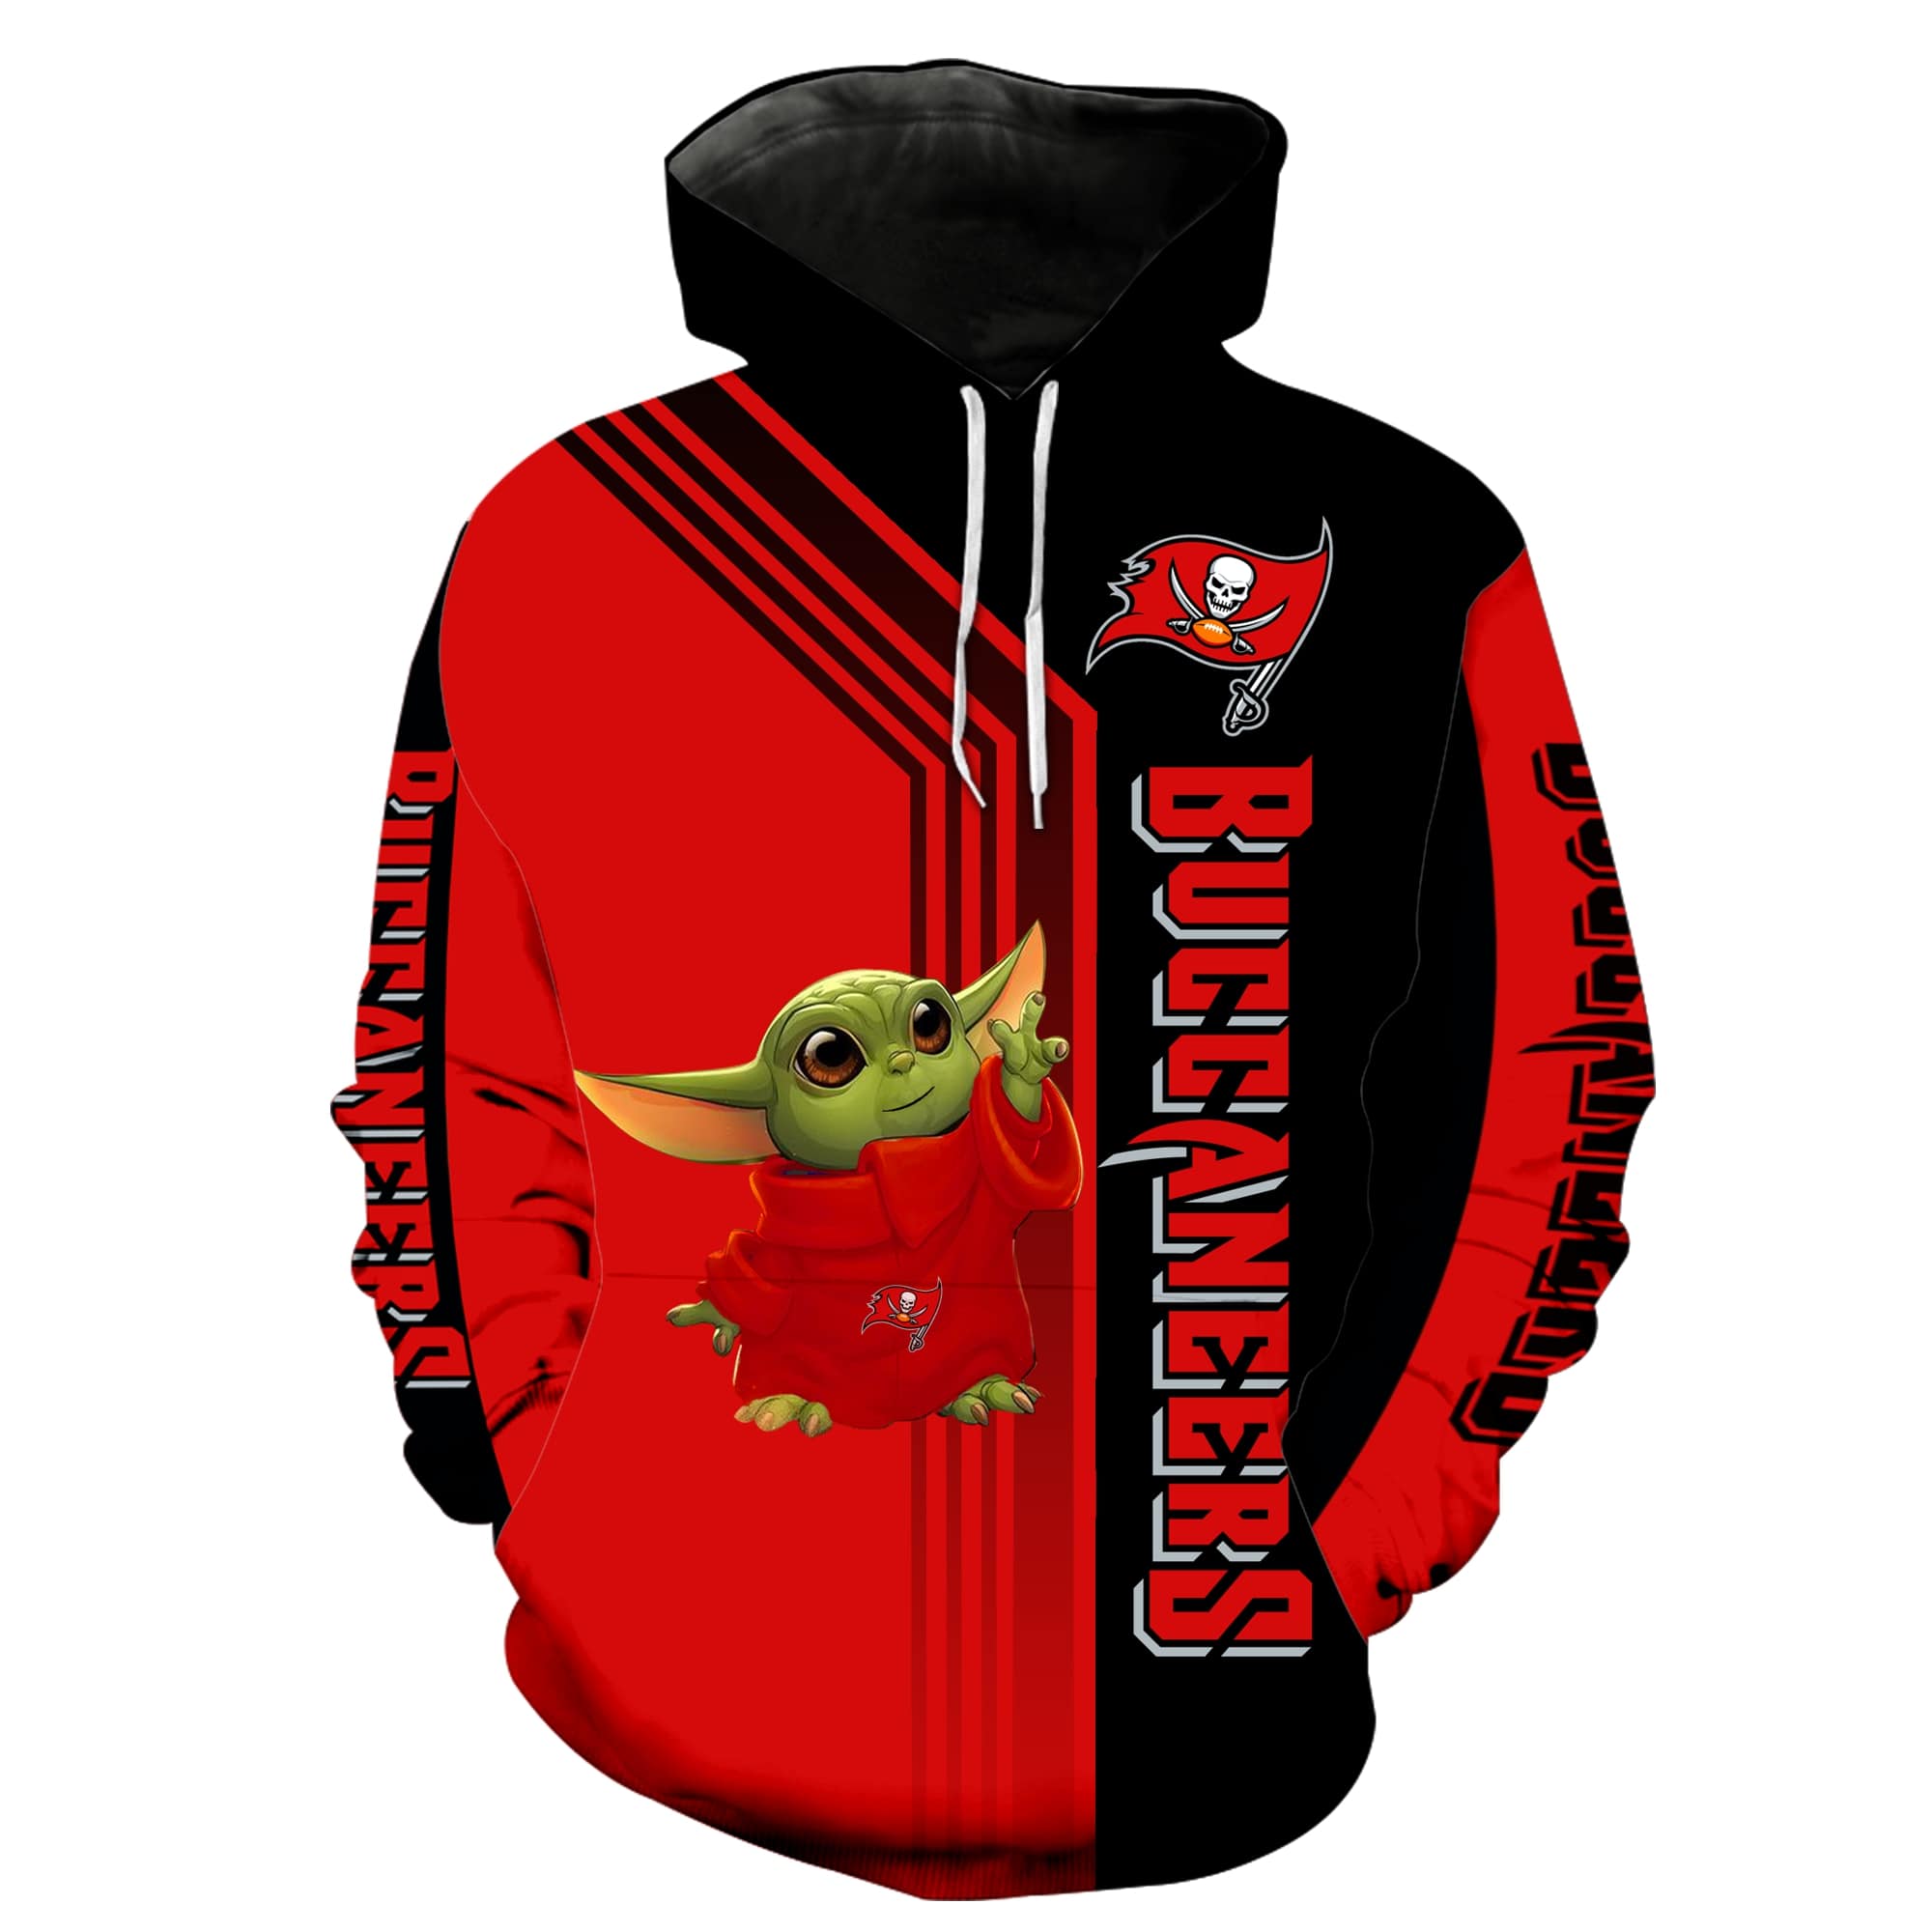 Baby yoda tampa bay buccaneers all over printed hoodie